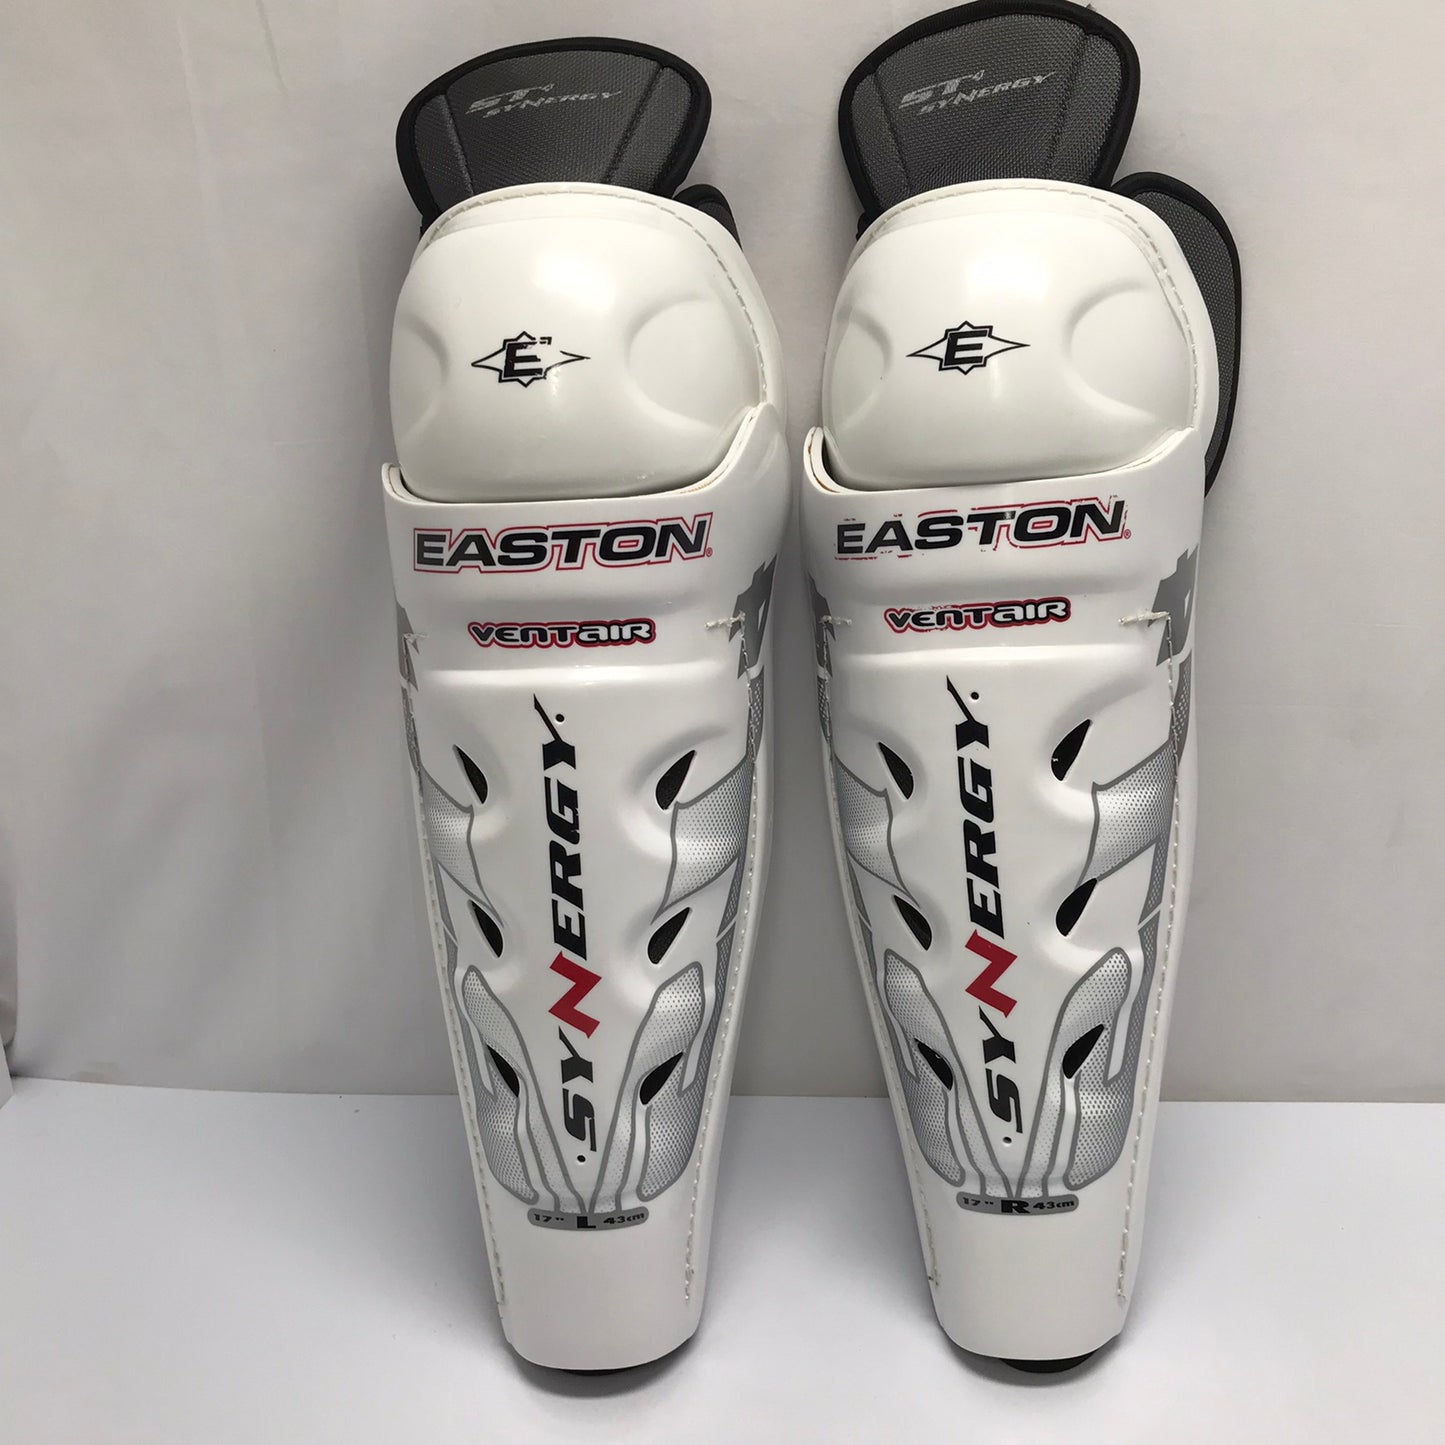 Hockey Shin Pads Men's Size 17 inch Easton Synergy White Grey Excellent